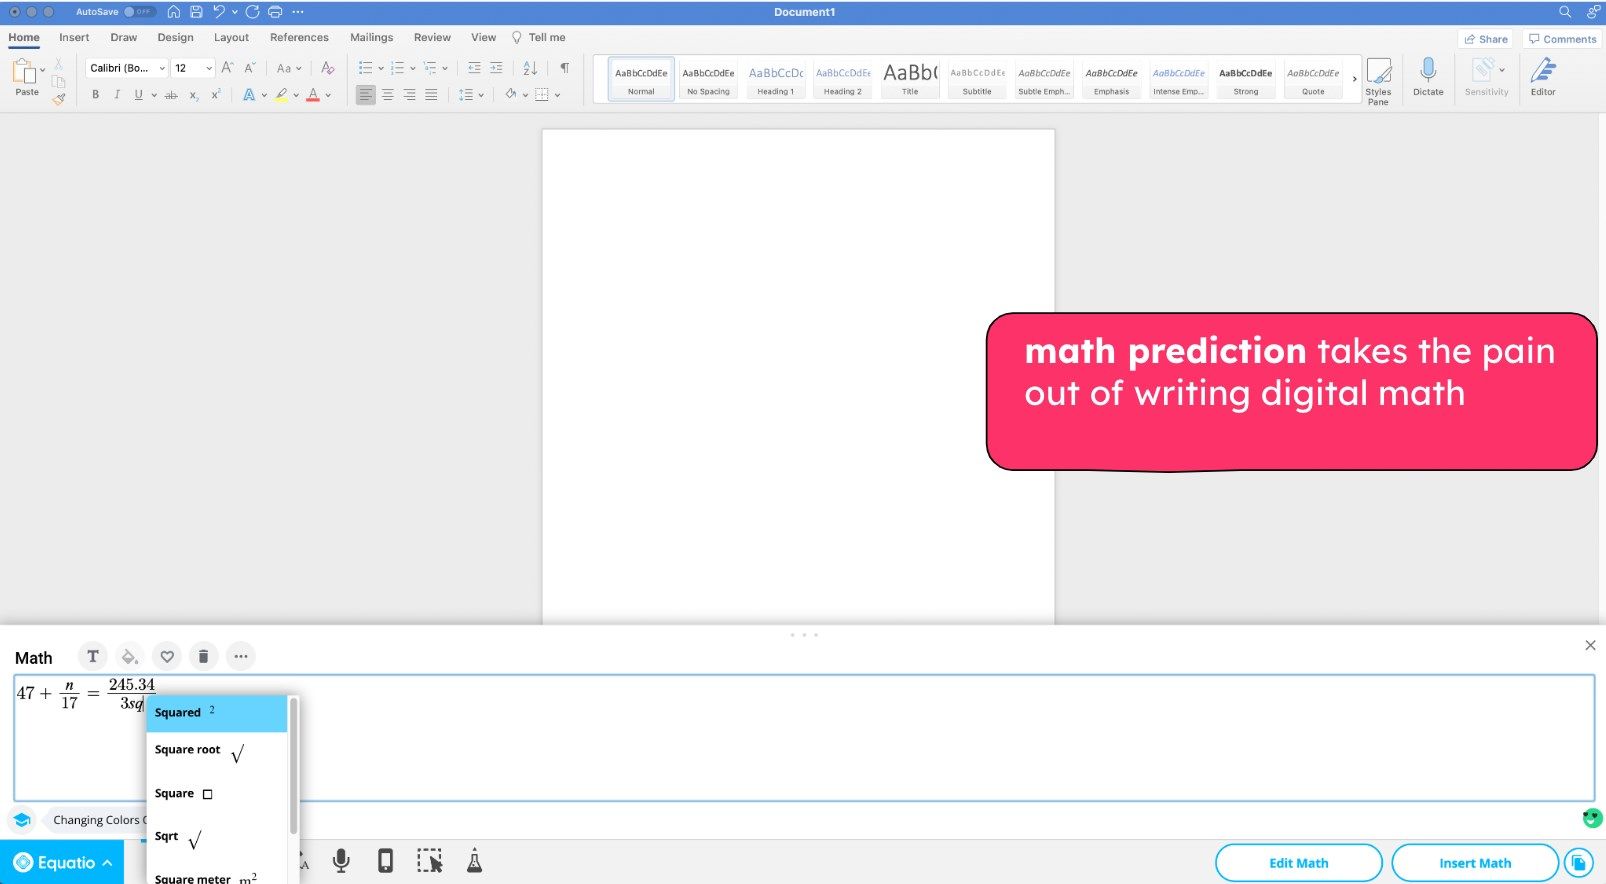 math prediction takes the pain out of writing digital math